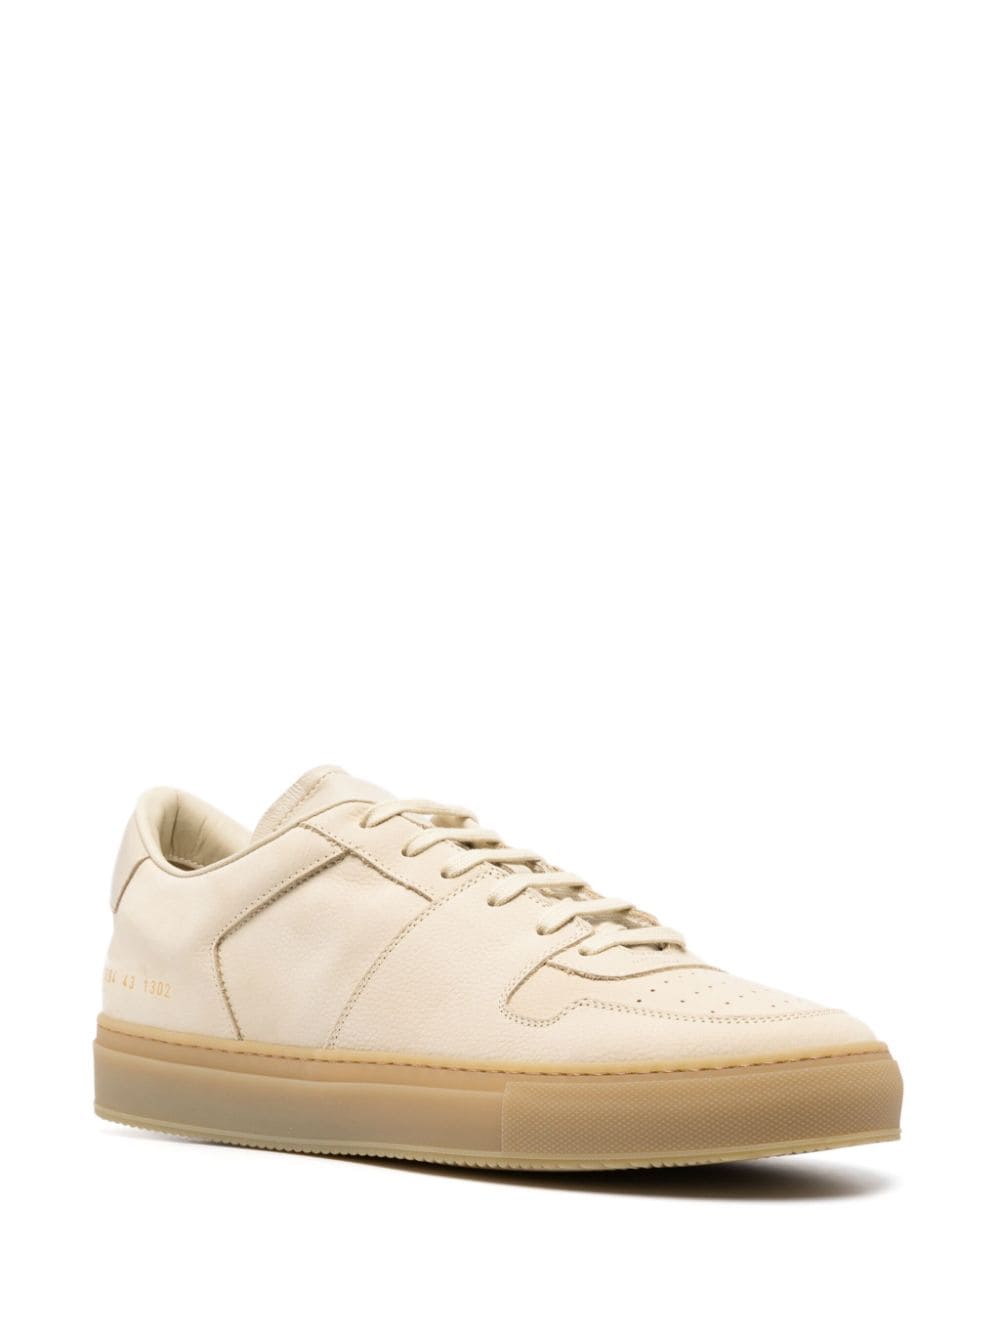 Common Projects Decades leather sneakers - Beige